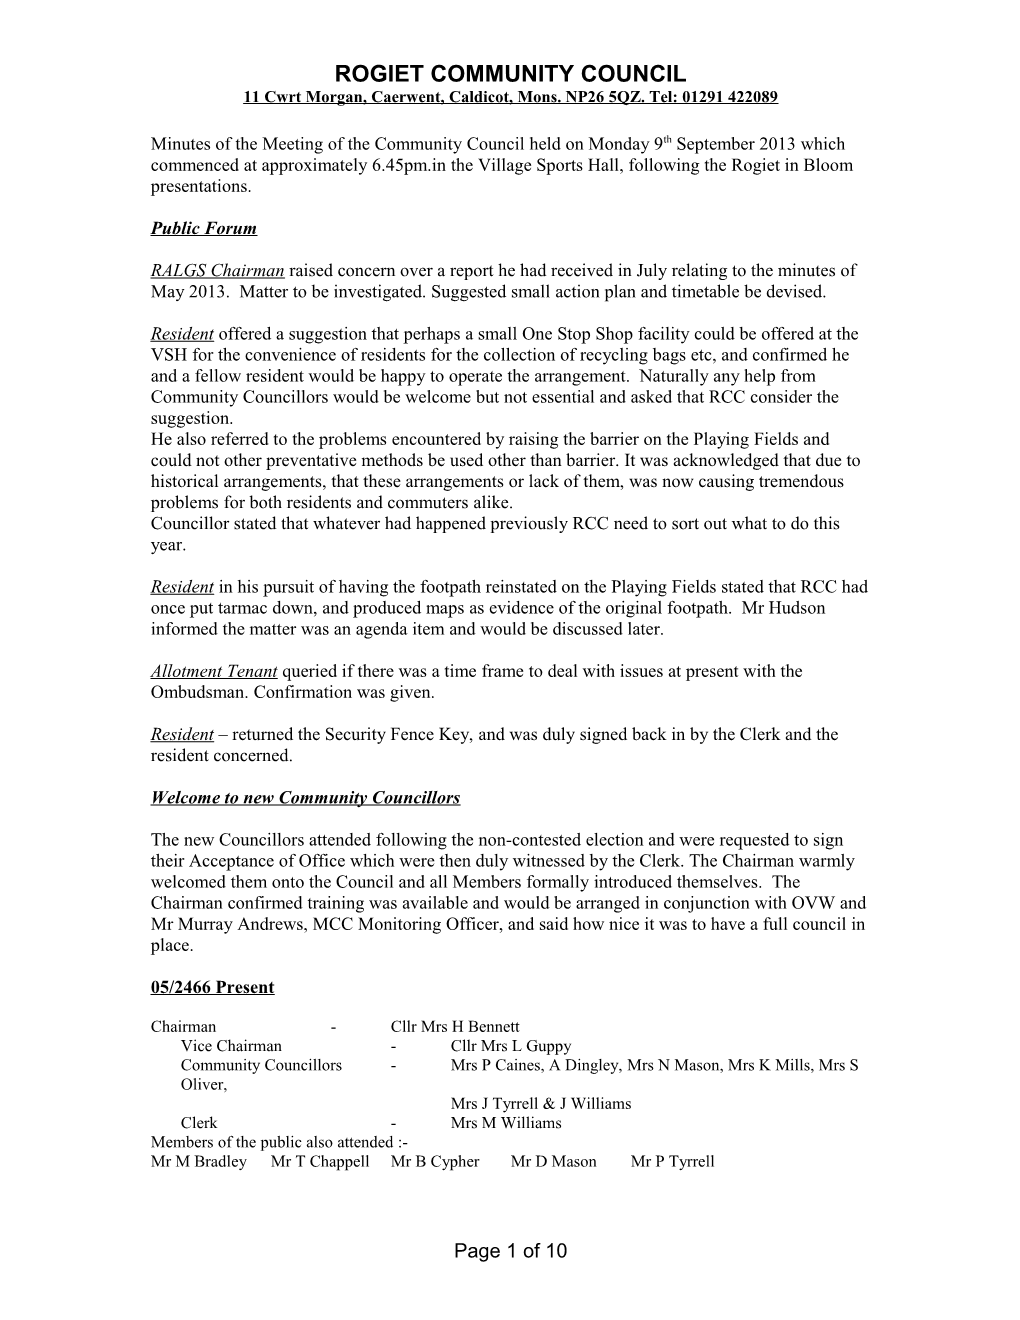 Minutes of the Meeting of the Community Council Held on Monday 20Th June 2011 Commencing at 6